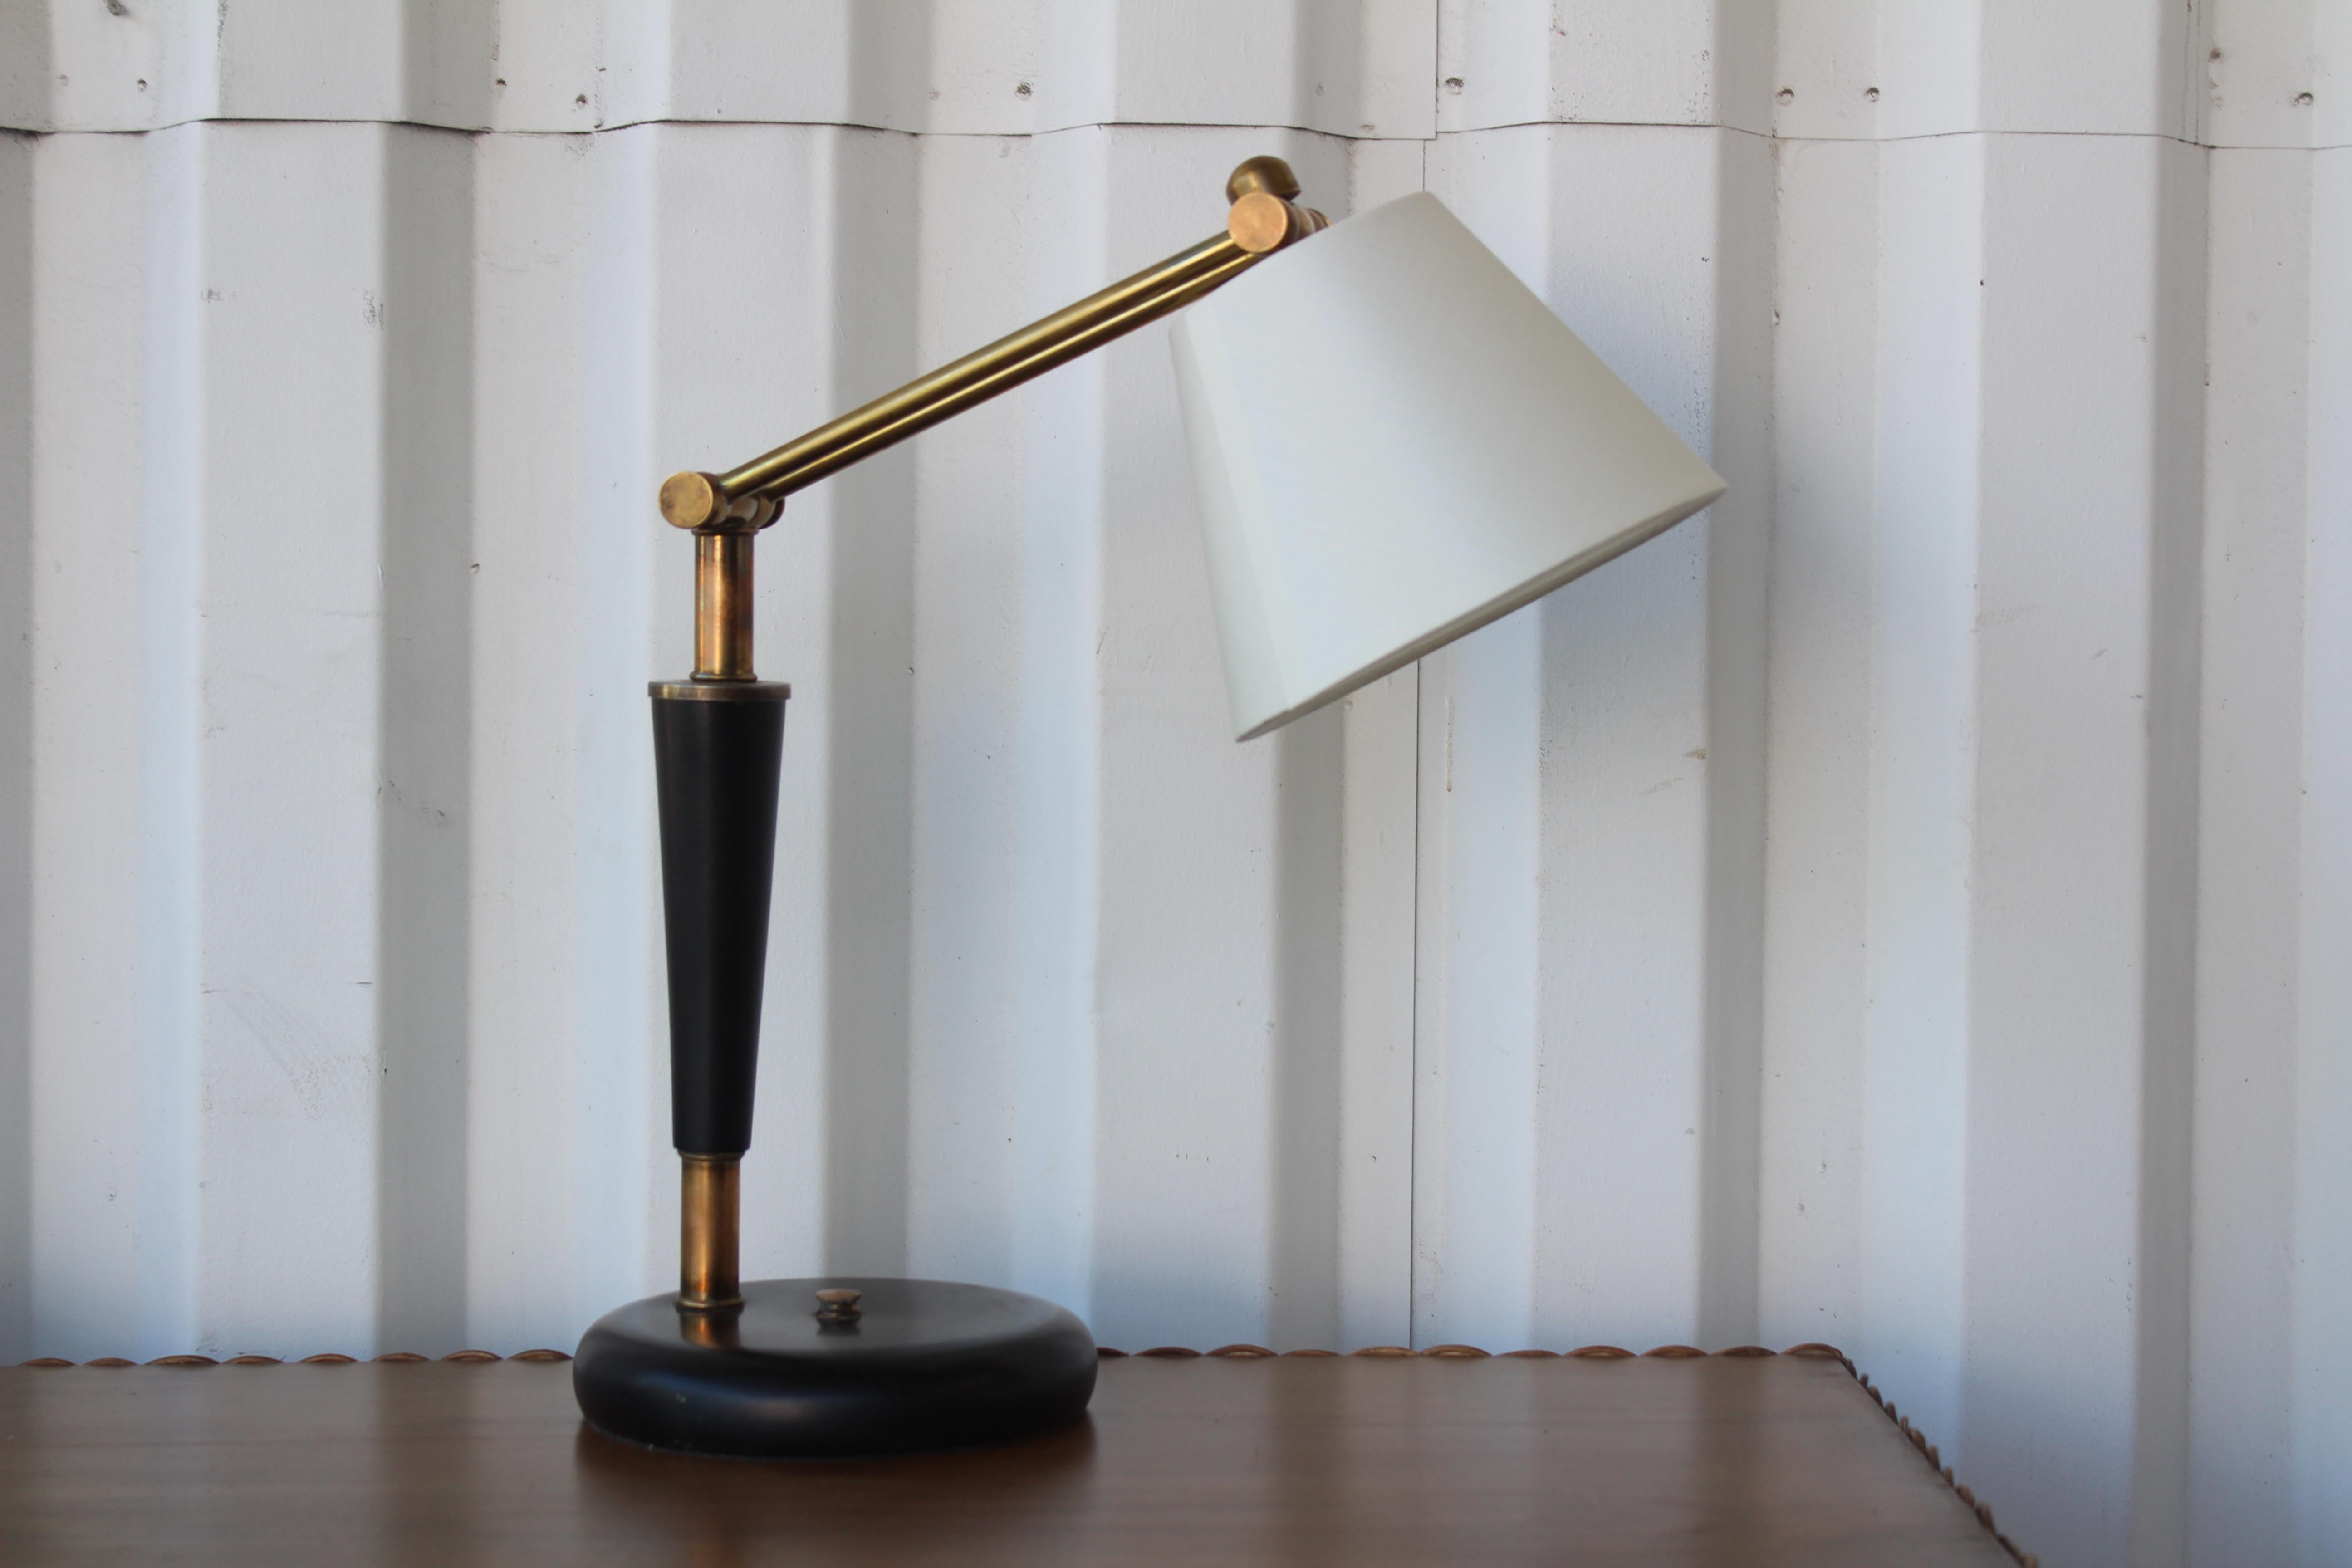 Vintage 1950s French desk lamp. Metal base, wood stem in a black finish and brass adjustable arm. Newly rewired and fitted with a new custom silk shade.